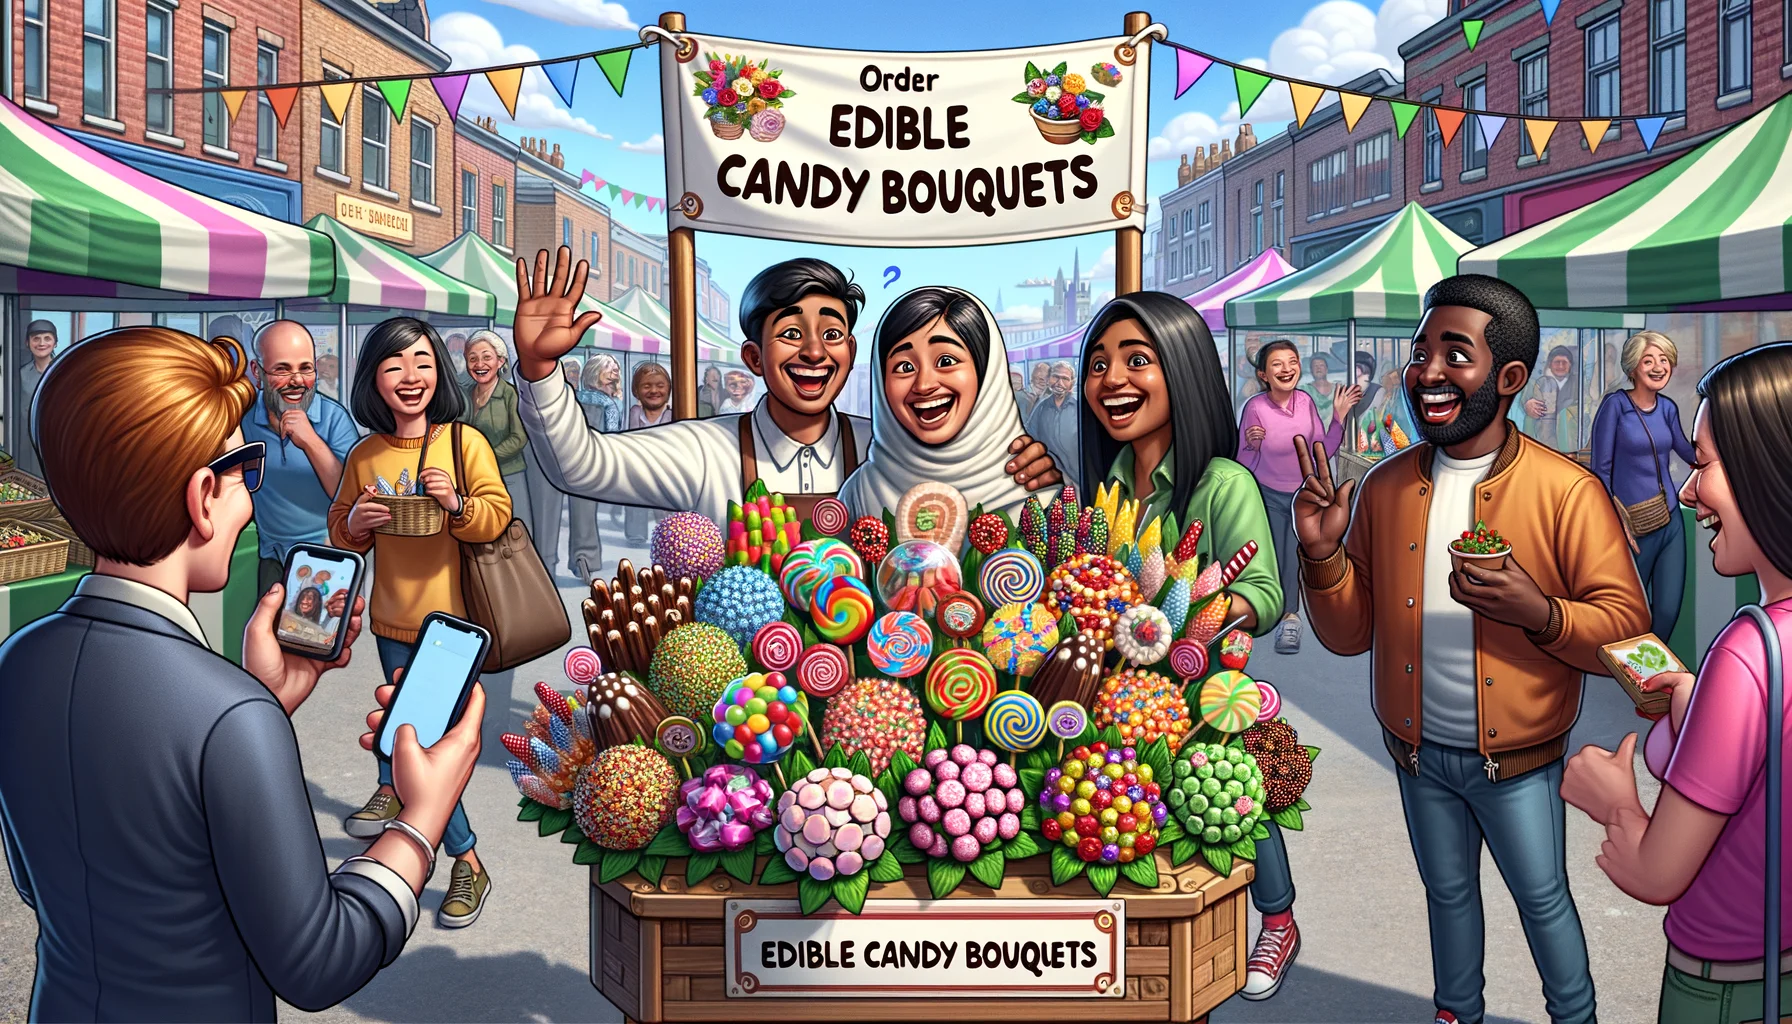 Envision an amusing but plausible scenario perfectly designed for promoting 'Edible Candy Bouquets'. A bustling local farmers market on a sunny day with a joyous atmosphere. A stand is vibrantly decorated with an array of colorful edible candy bouquets, catching the eyes of all passersby. A cheerful South Asian female vendor, and a cheerful Middle Eastern male vendor, waving to potential customers. Some customers, a happy Caucasian male tasting a candy bouquet and a Black female laughing as she takes a selfie with her candy bouquet, add to the lively scene. Don't forget the playful text banner above the stand that invites everyone: 'Order Edible Candy Bouquets'.